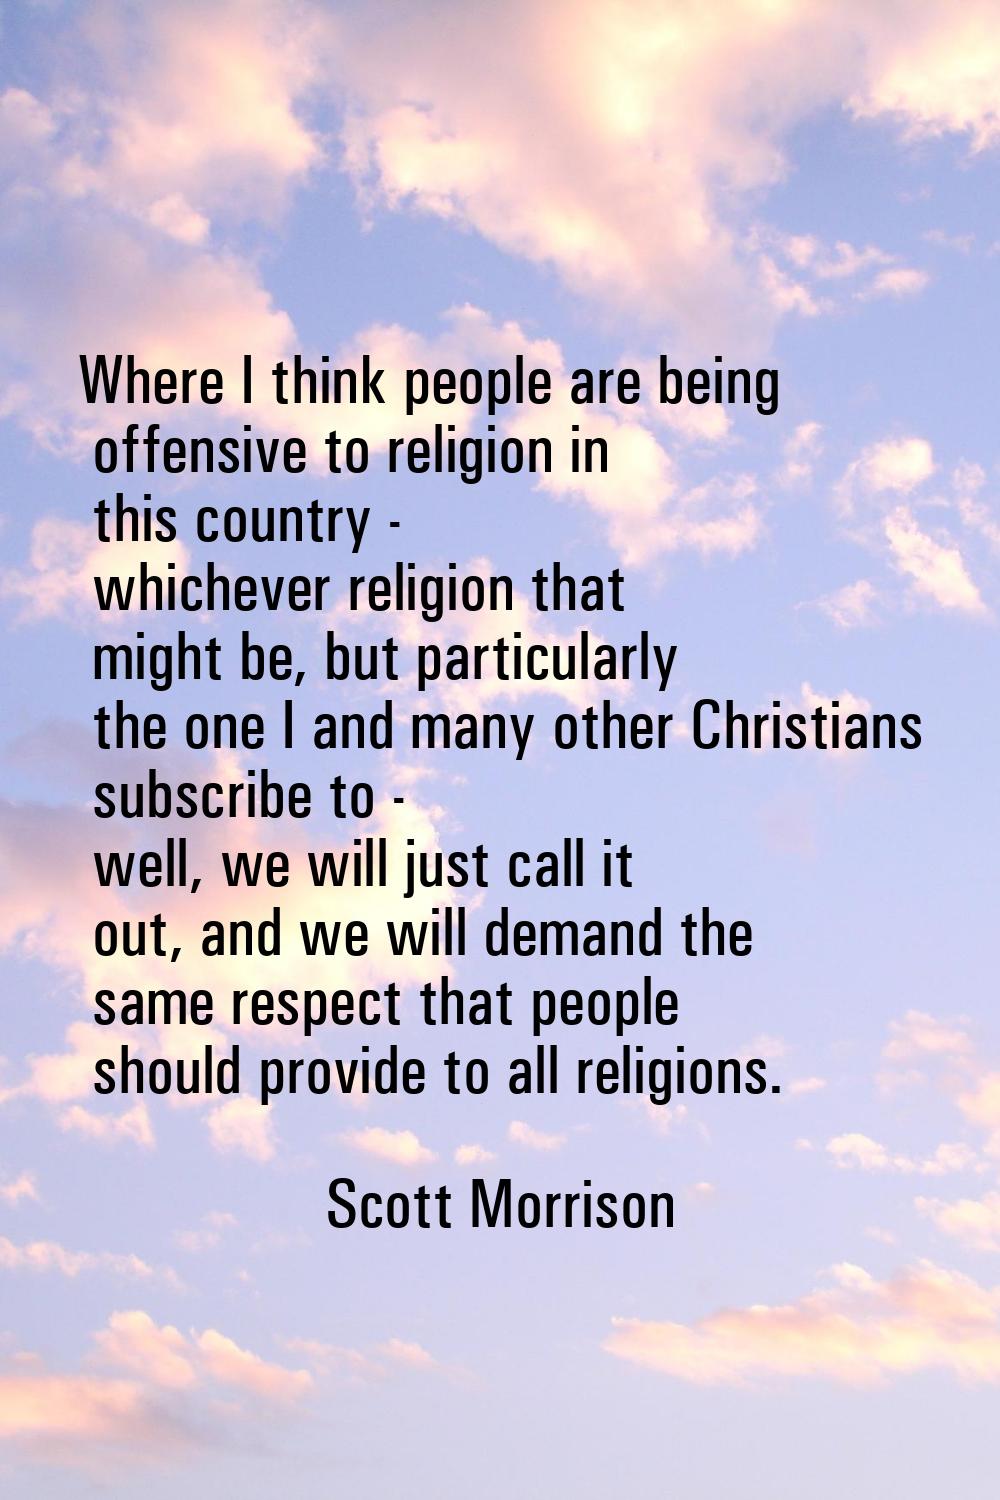 Where I think people are being offensive to religion in this country - whichever religion that migh